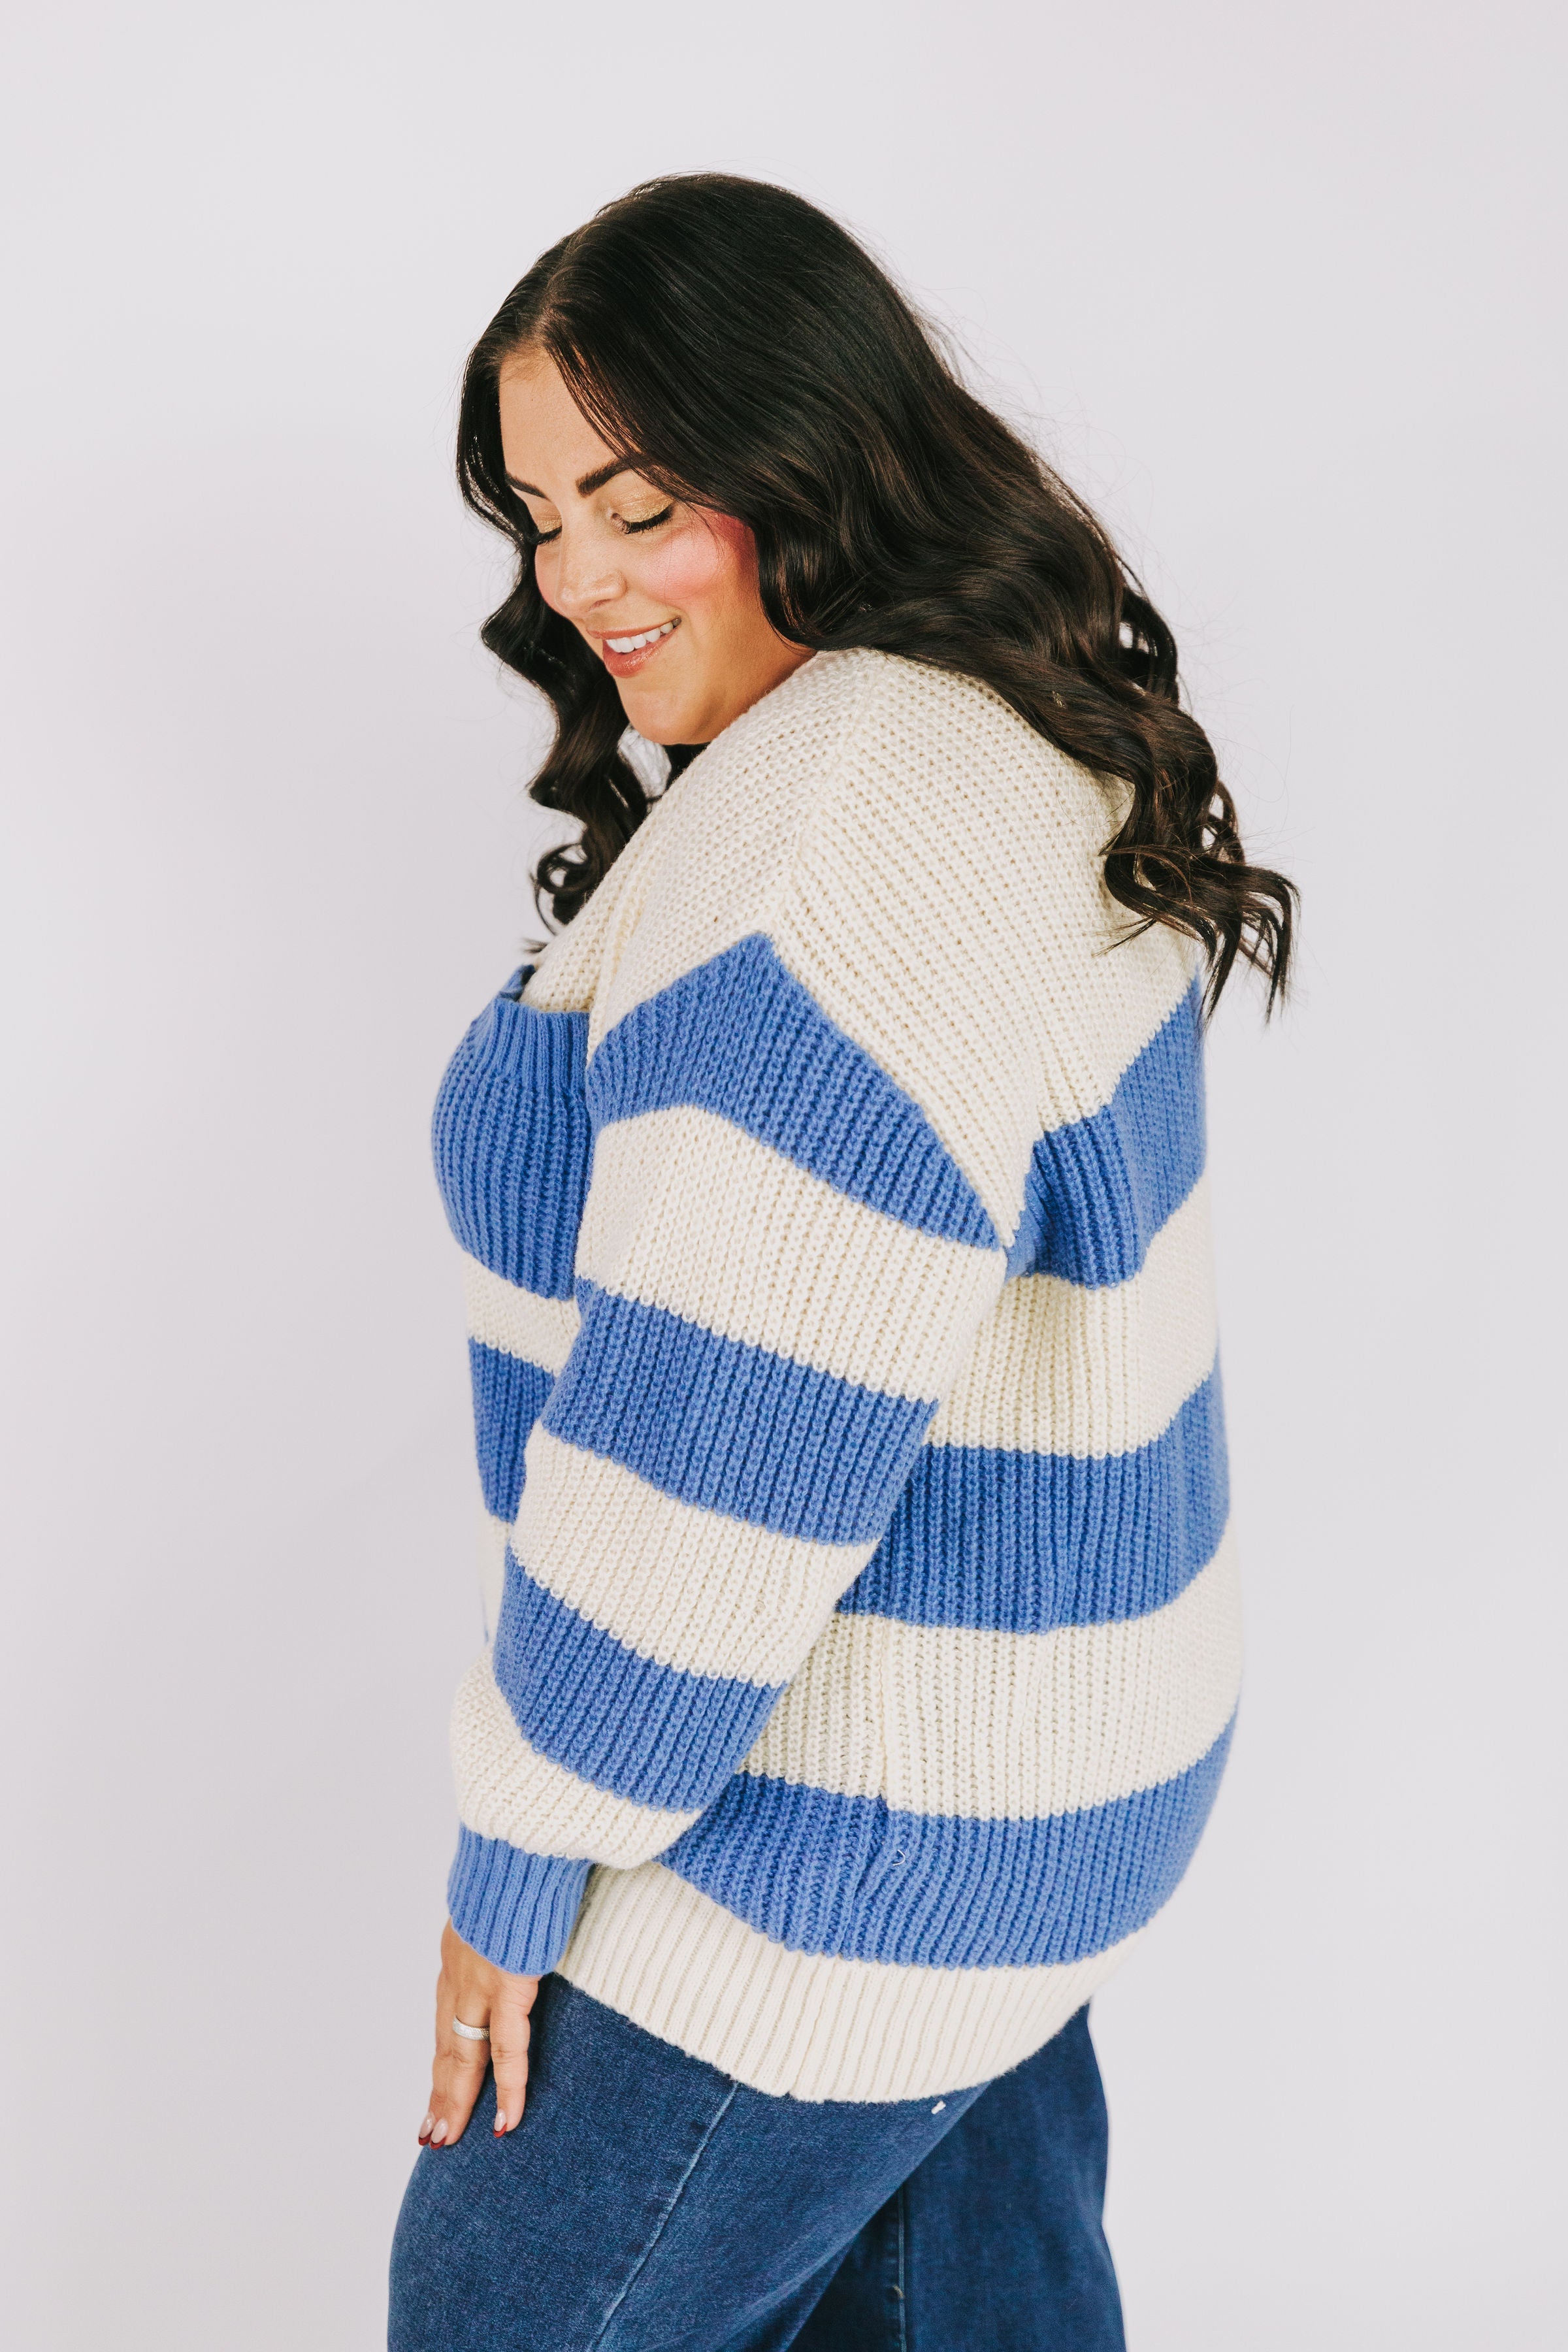 PLUS SIZE - Out Of My Mind Sweater - New Color!